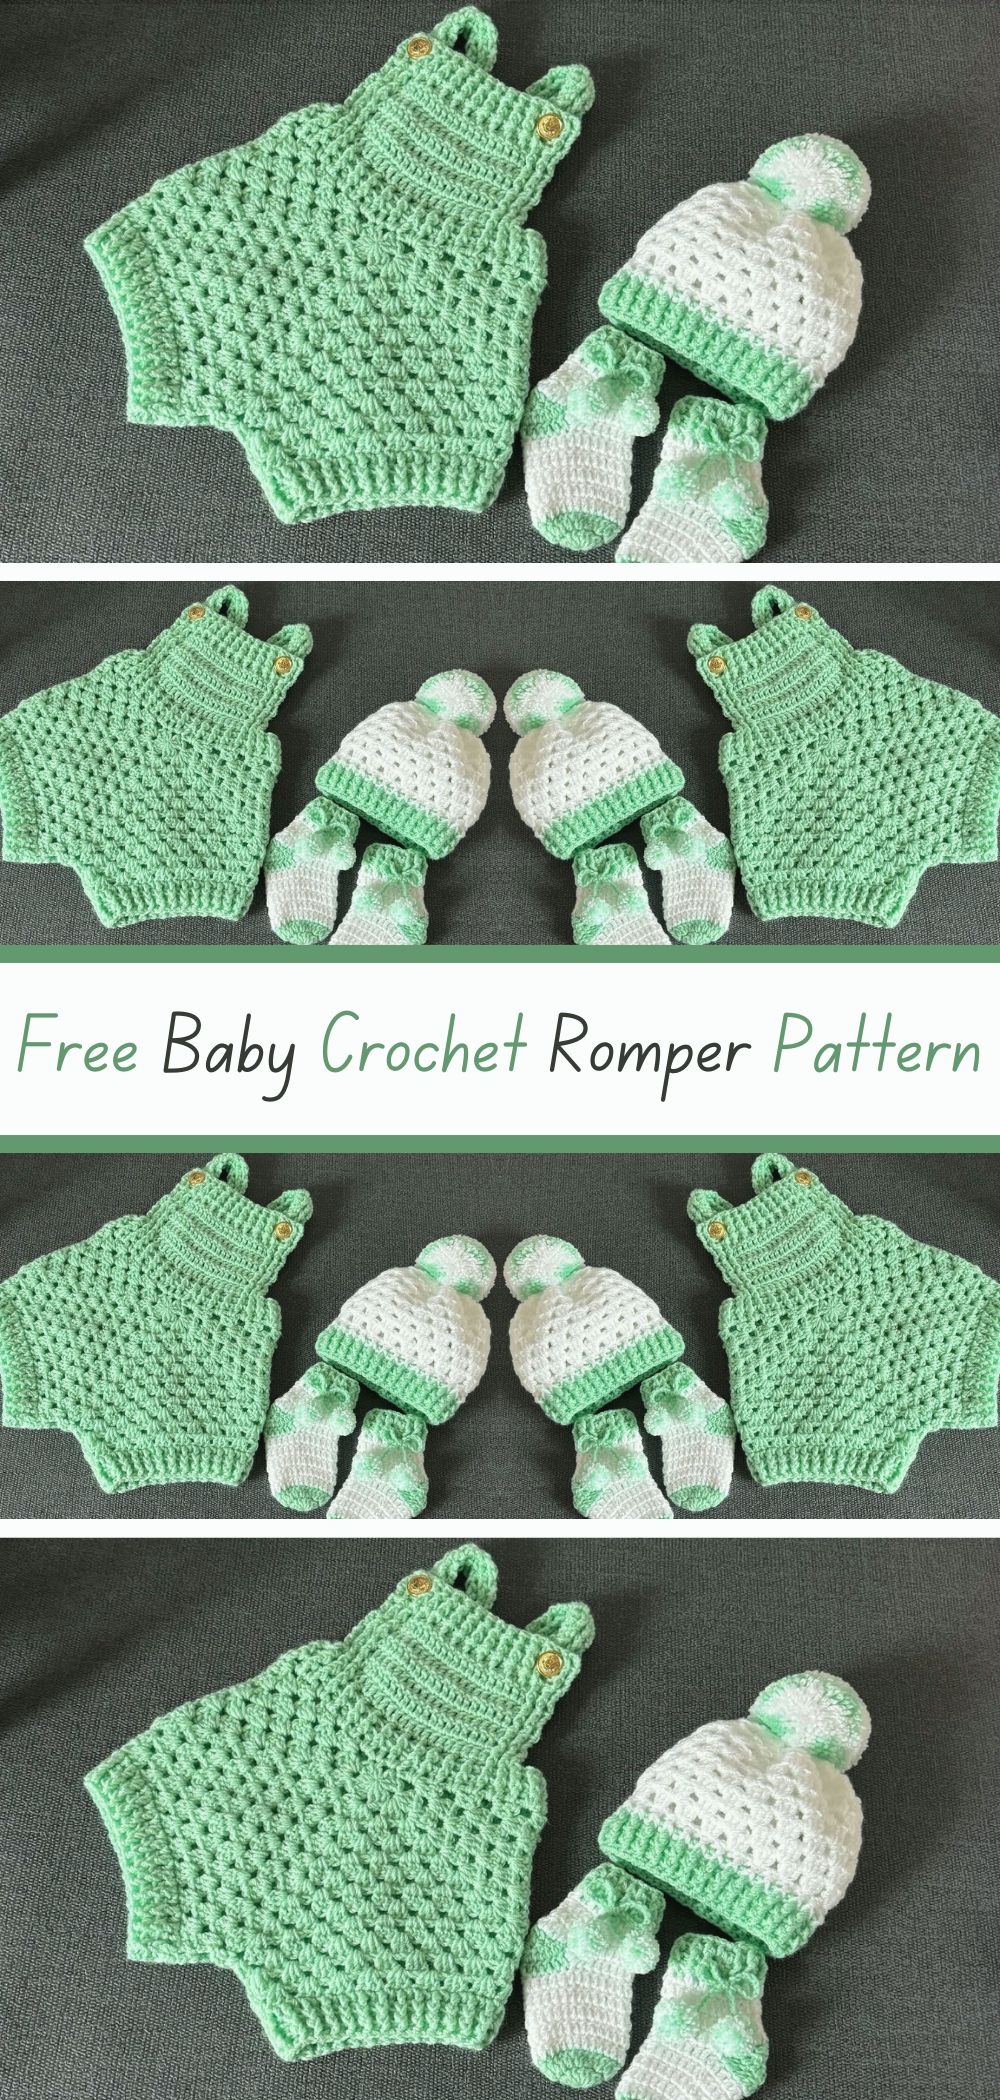 Free Baby Crochet Romper Pattern - Create an adorable and cozy romper for babies with this free crochet pattern